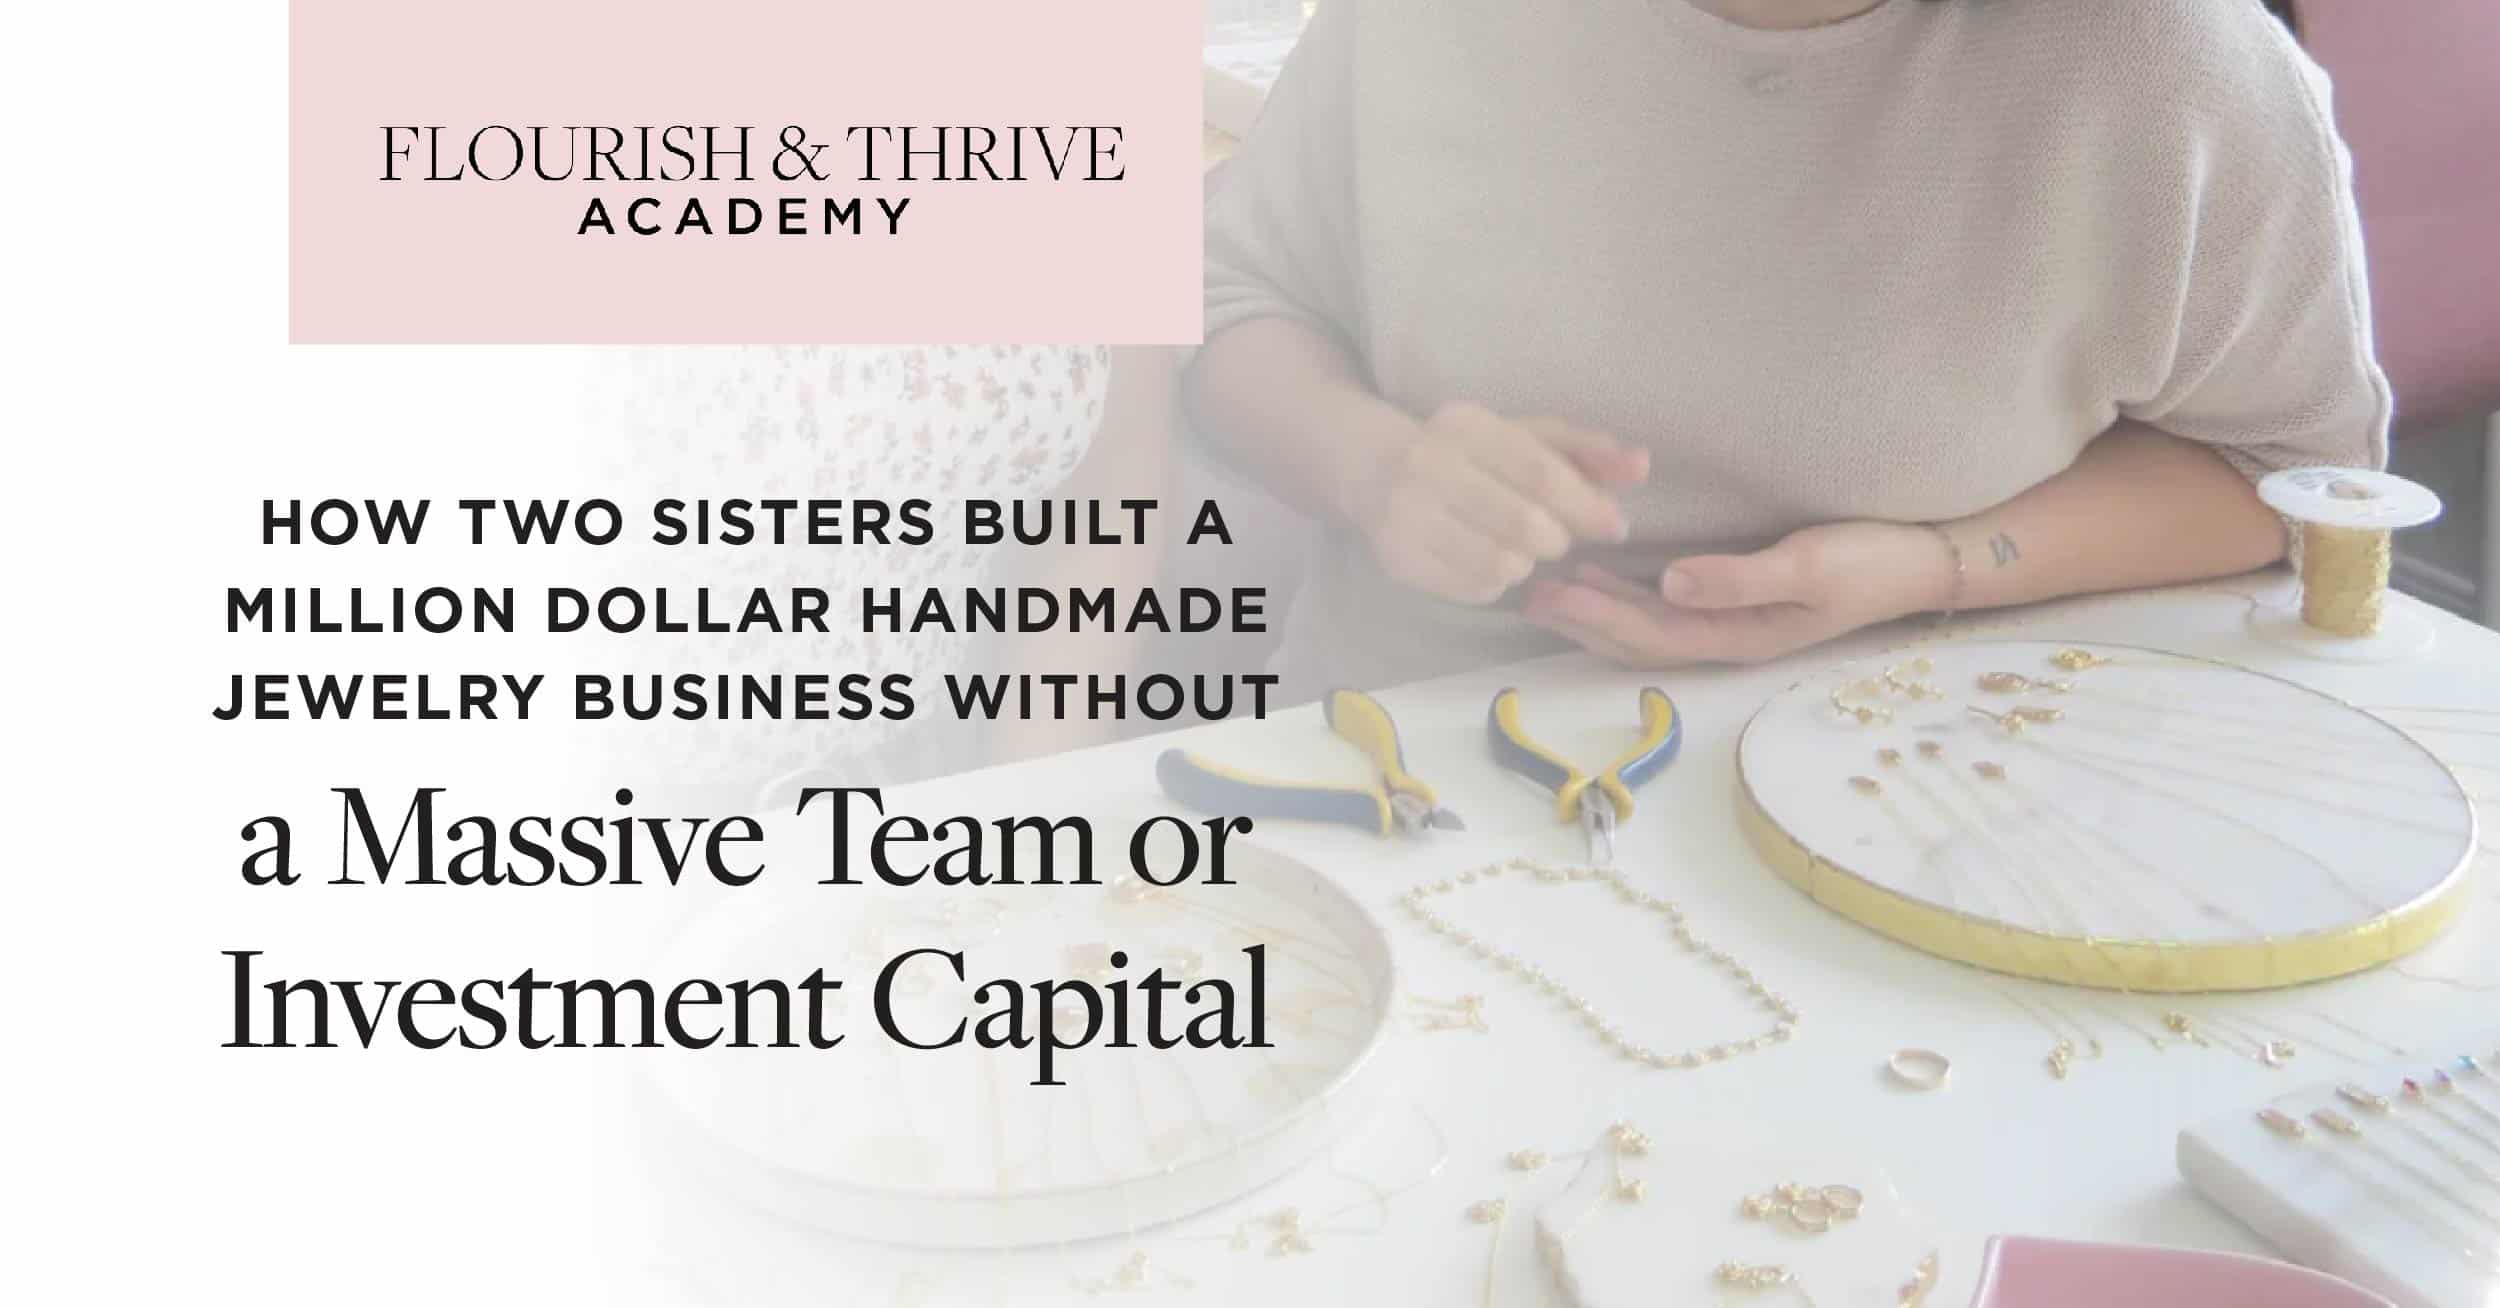 How Two Sisters Built a Million Dollar Handmade Jewelry Business Without a Massive Team or Investment Capital